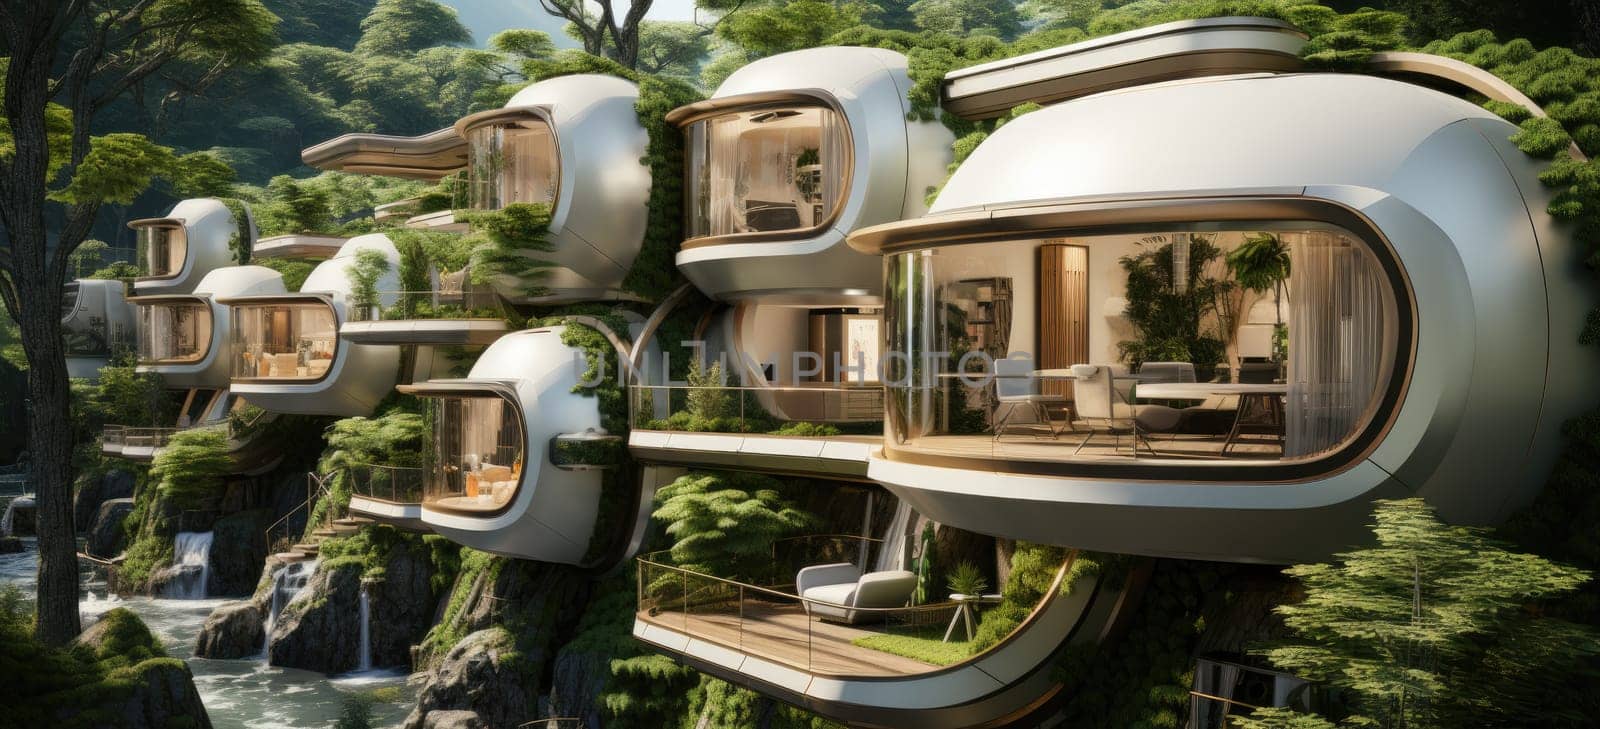 Life-giving nature around compact capsule houses by Yurich32